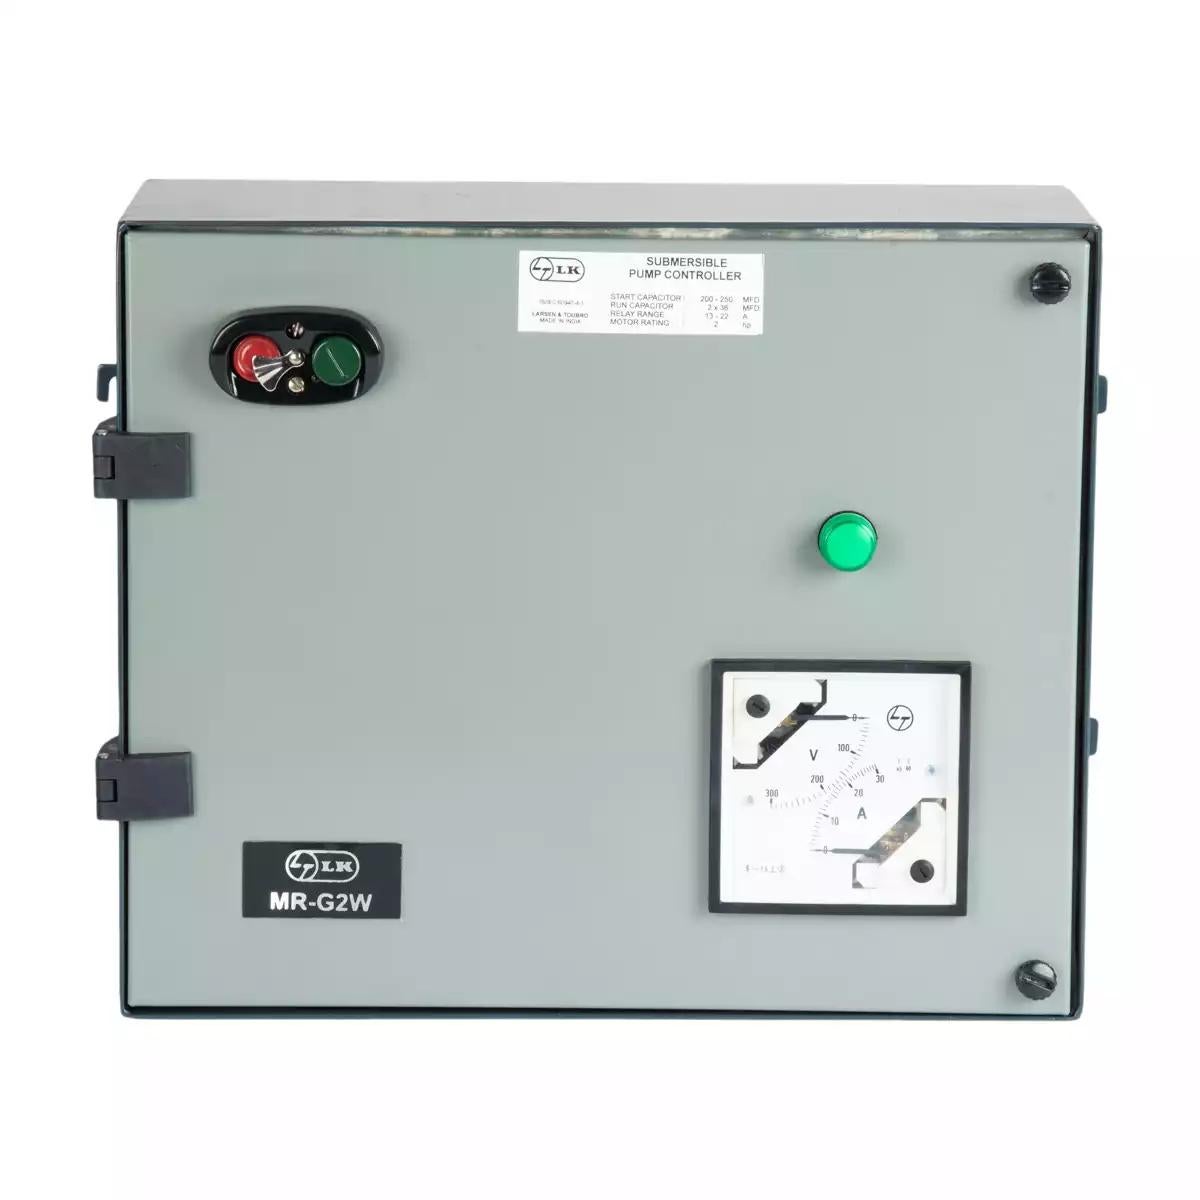 Single Phase Controller with WLC for Submersible Pump Application,MR-G2W,1HP,120 / 150mfd,1 x 50mfd (CS91041BCVG)